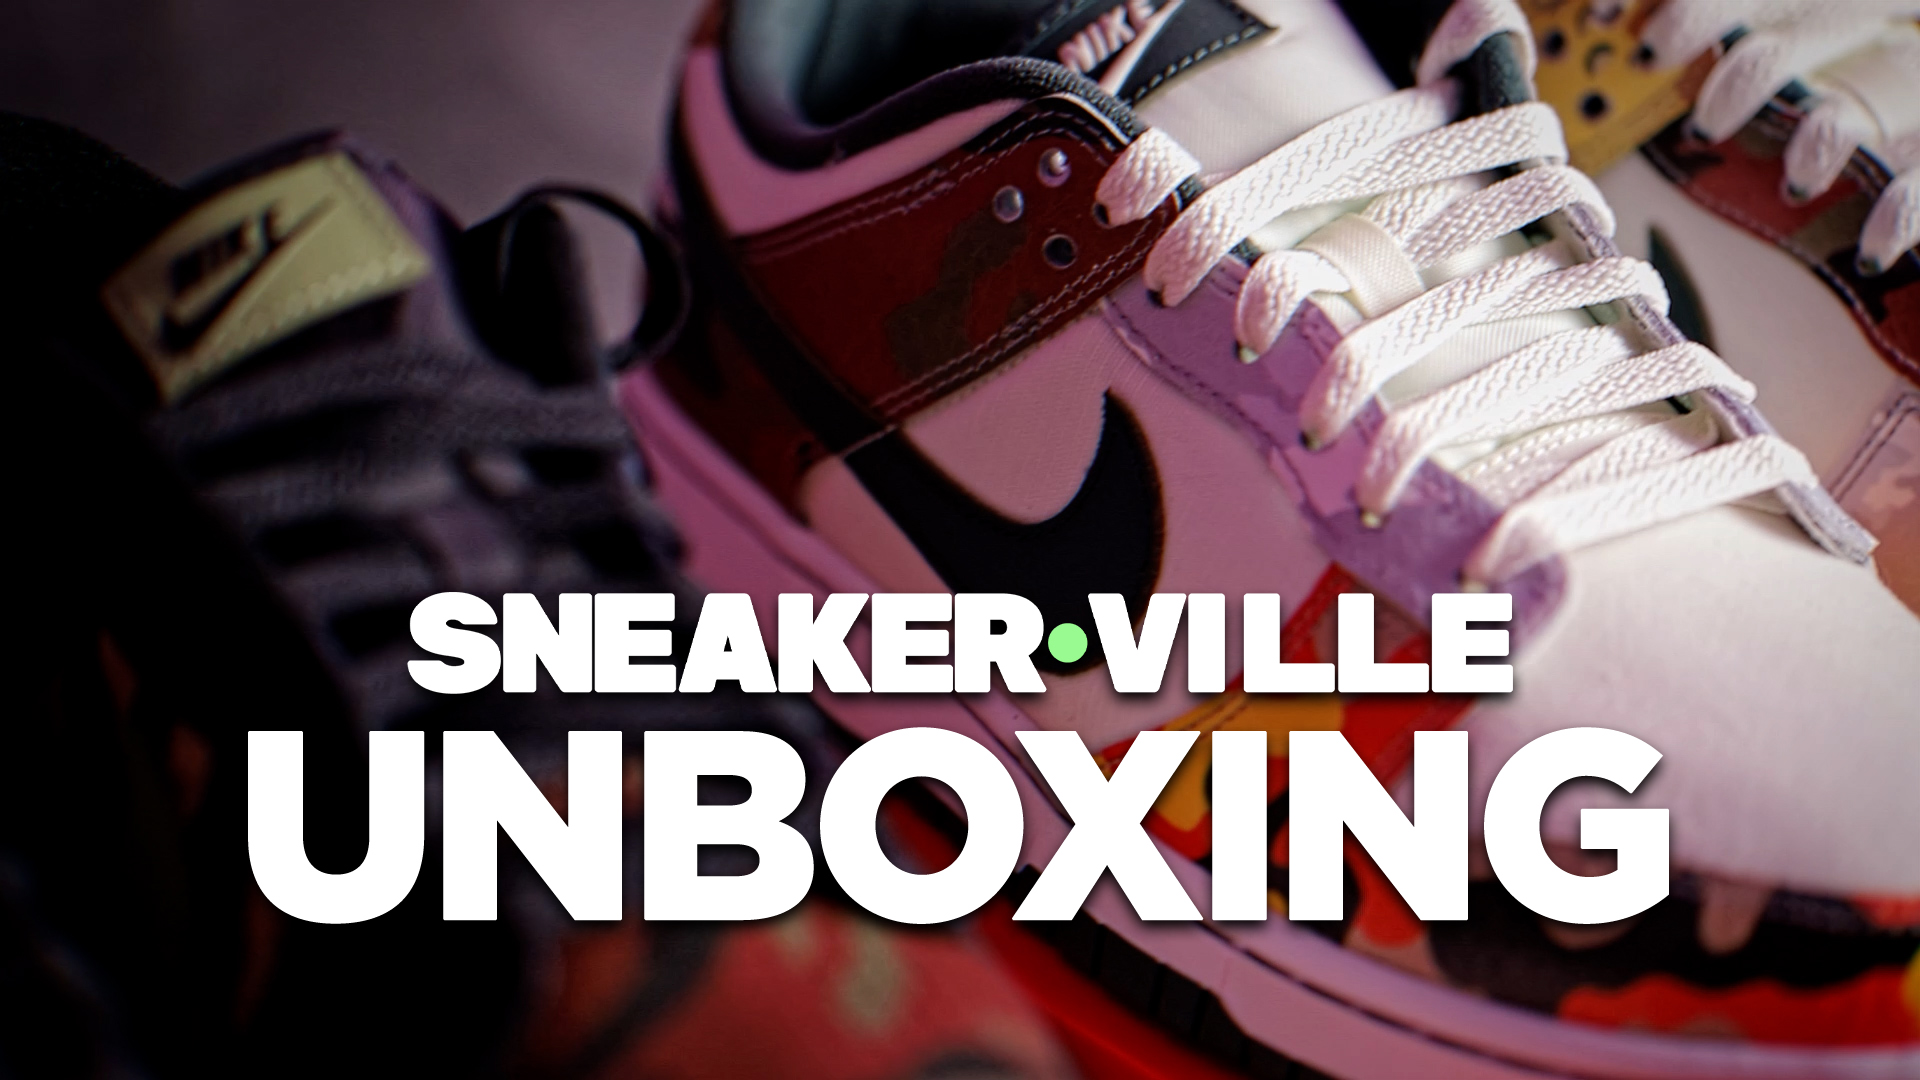 Sneakerville Unboxing – Nike Dunk Camo pack